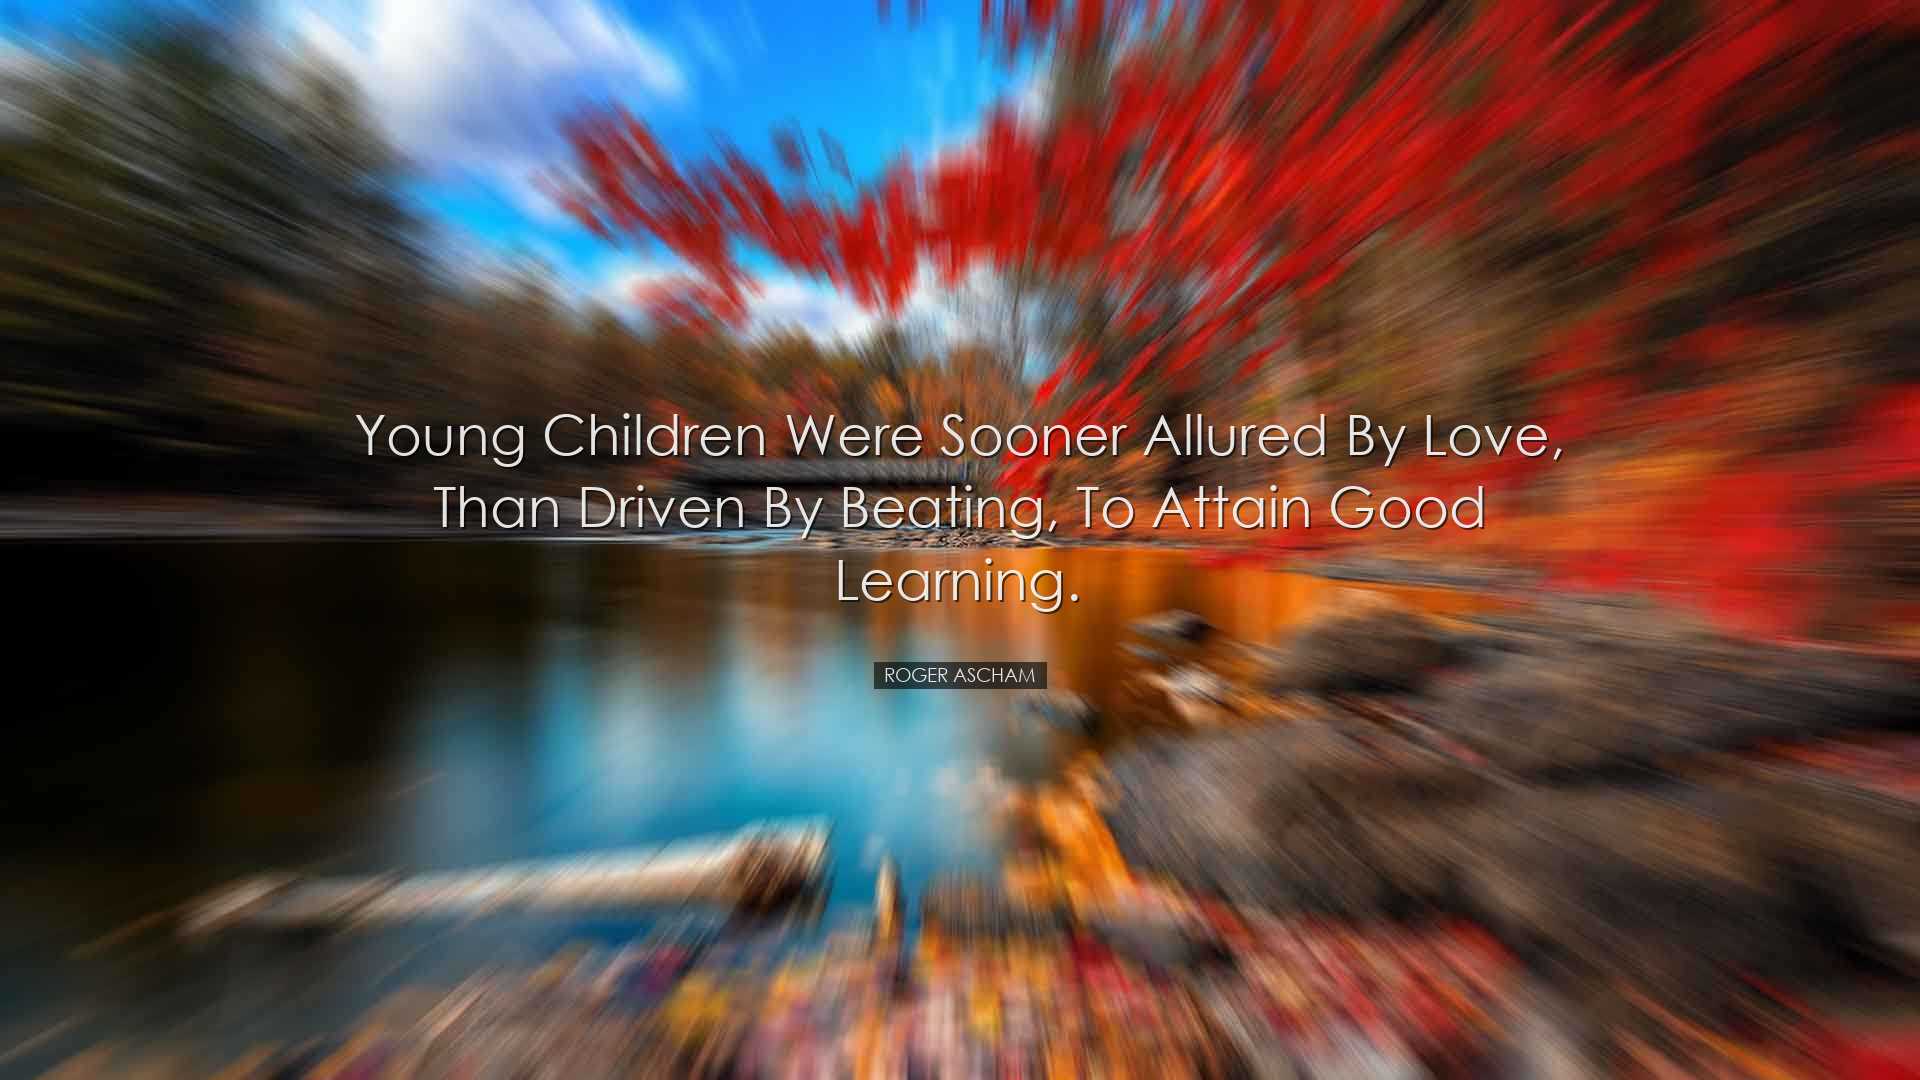 Young children were sooner allured by love, than driven by beating